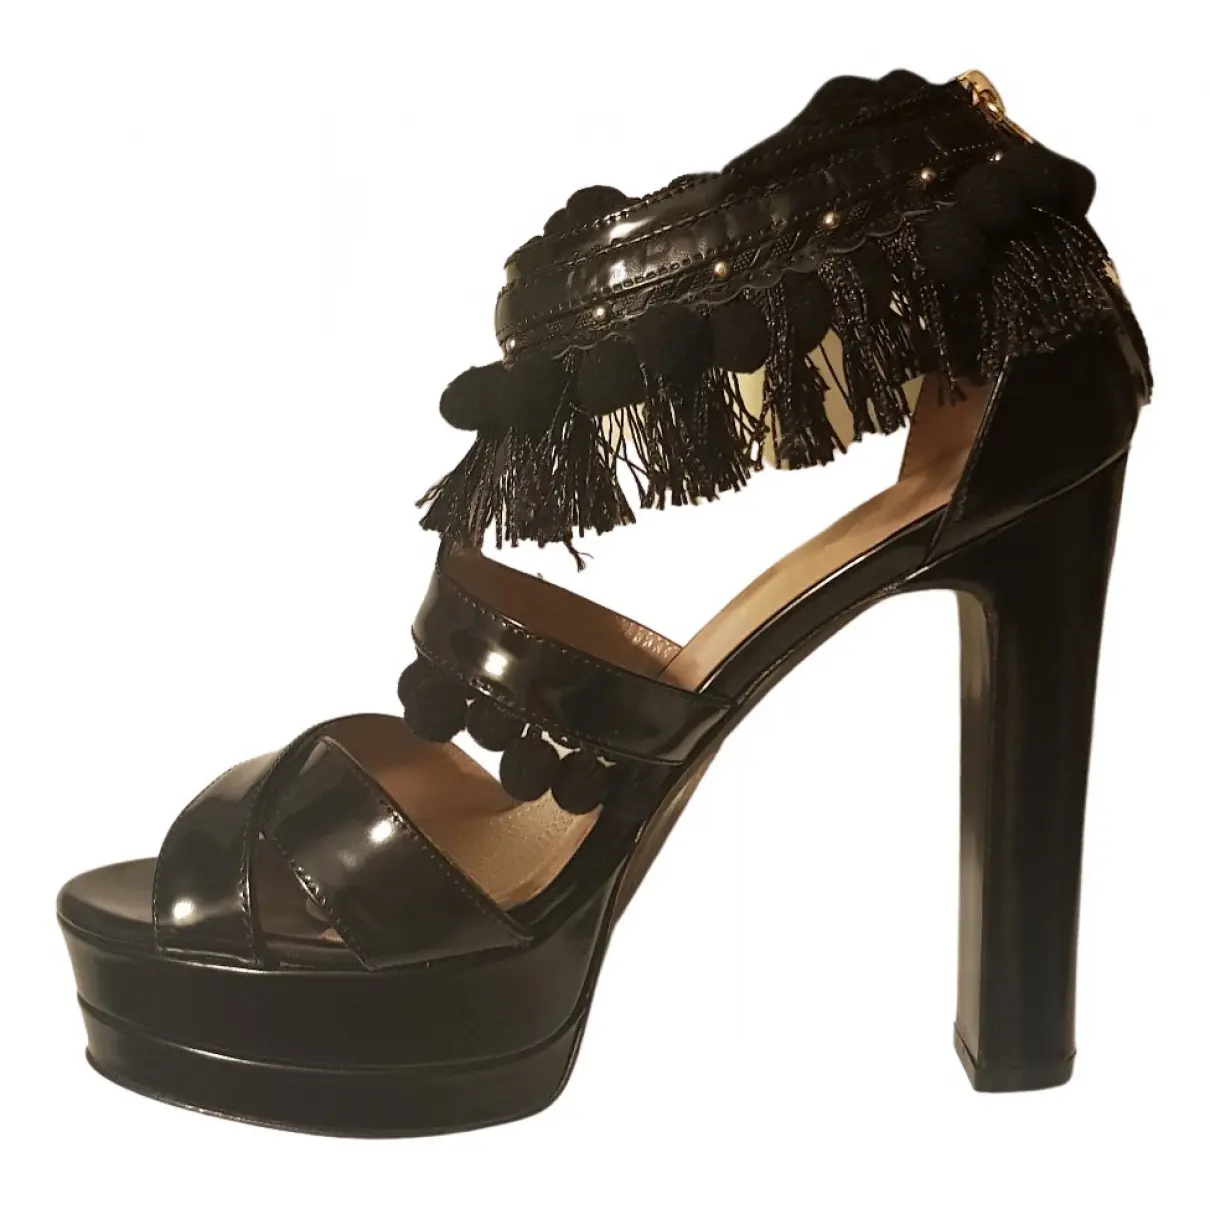 Patent leather heels Twinset